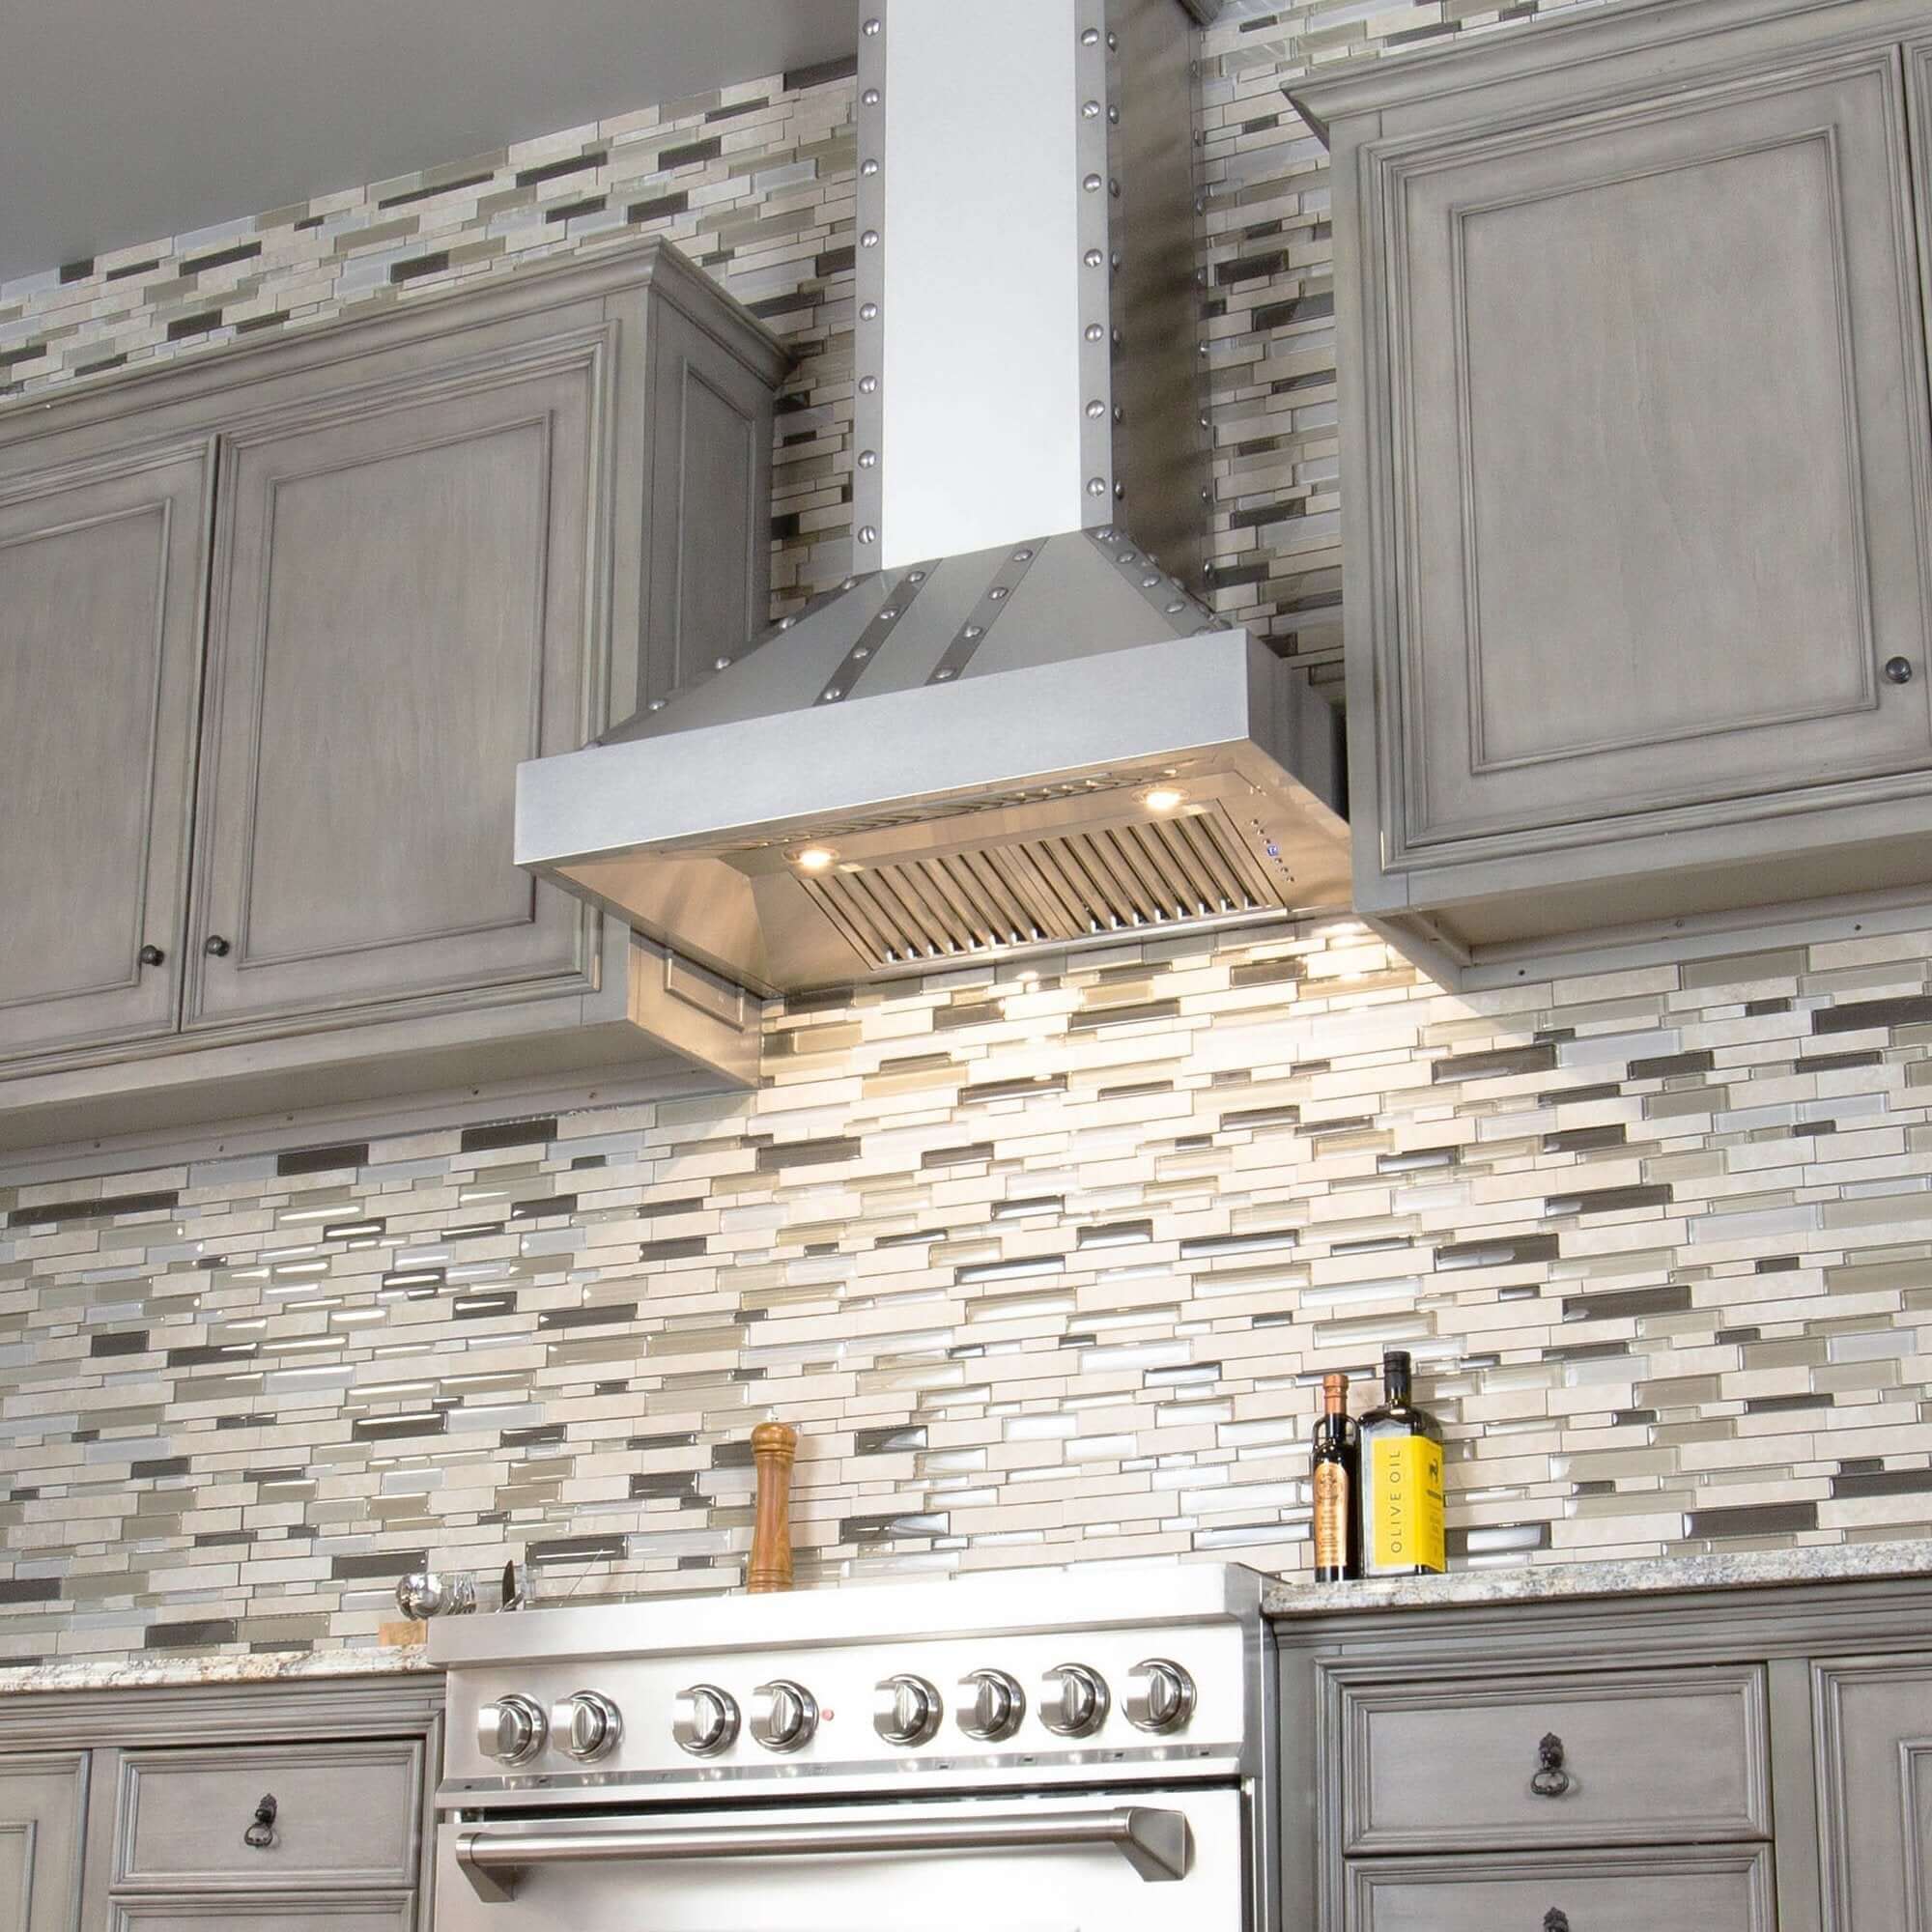 ZLINE Designer Series Wall Mount Range Hood in DuraSnow Stainless Steel with Nailhead Rivets (655-4SSSS) in a modern luxury kitchen with LED lighting activated.